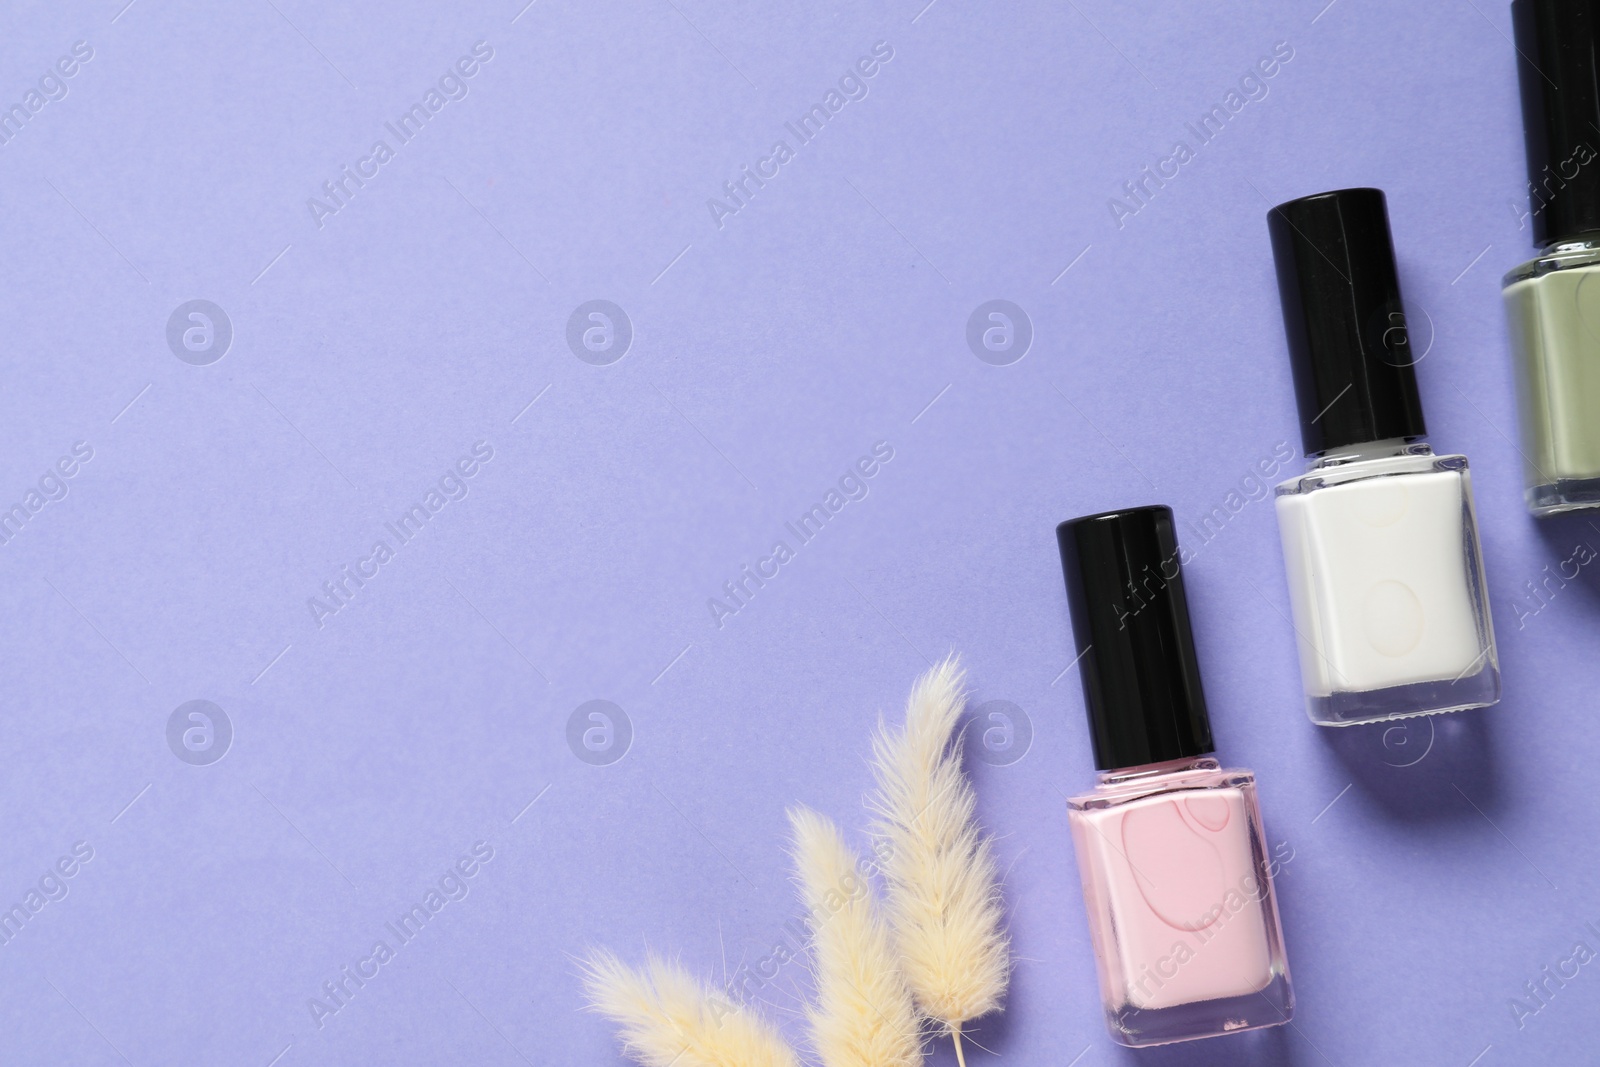 Photo of Nail polishes and decorative branches on lilac background, flat lay. Space for text